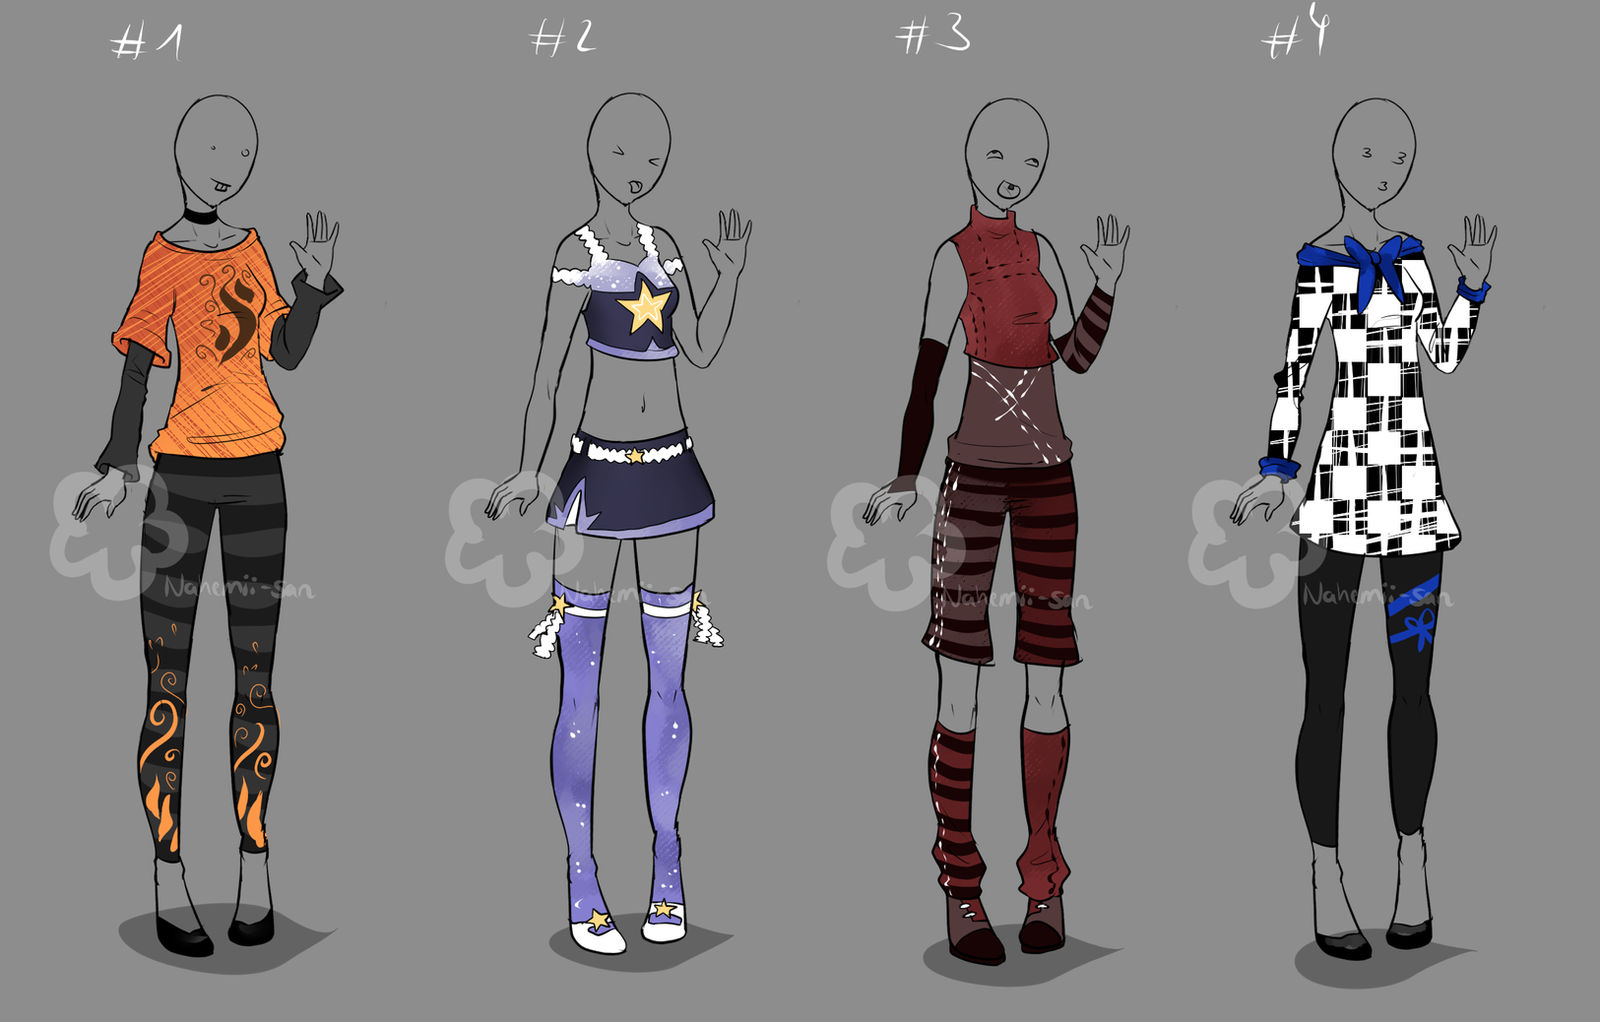 Some Outfit Adopts #25 - sold